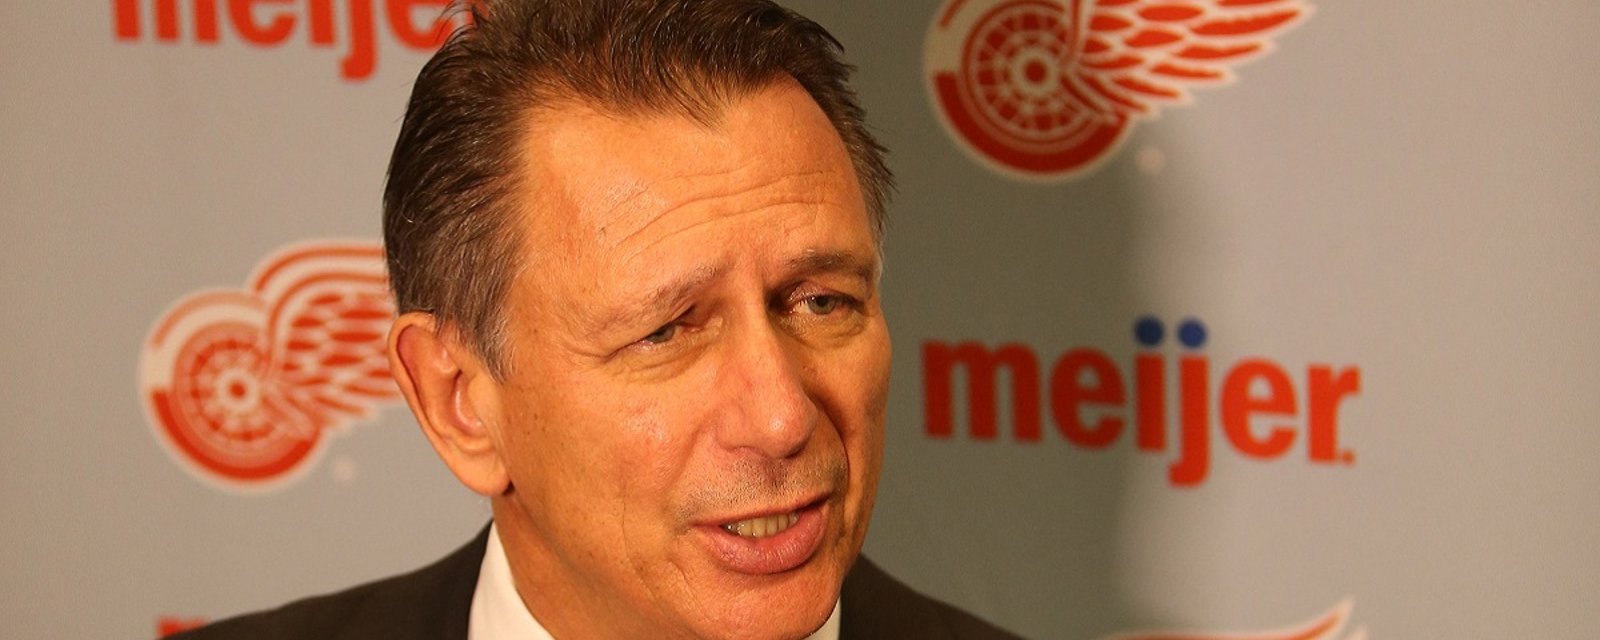 Ken Holland admits a move is likely coming from the Wings.